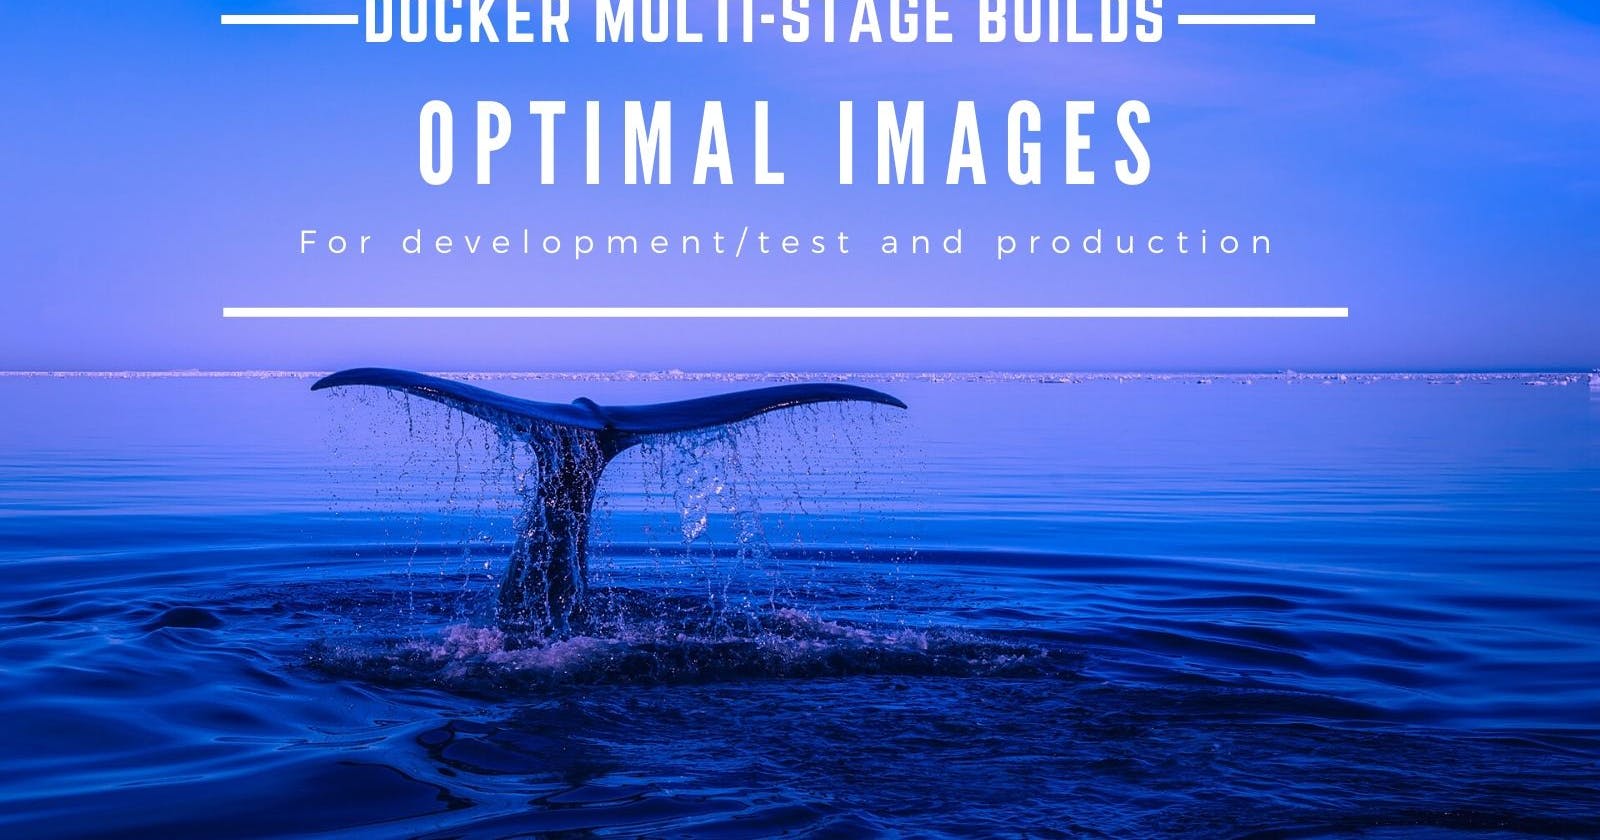 How to use docker multi-stage build to create optimal images for dev and production